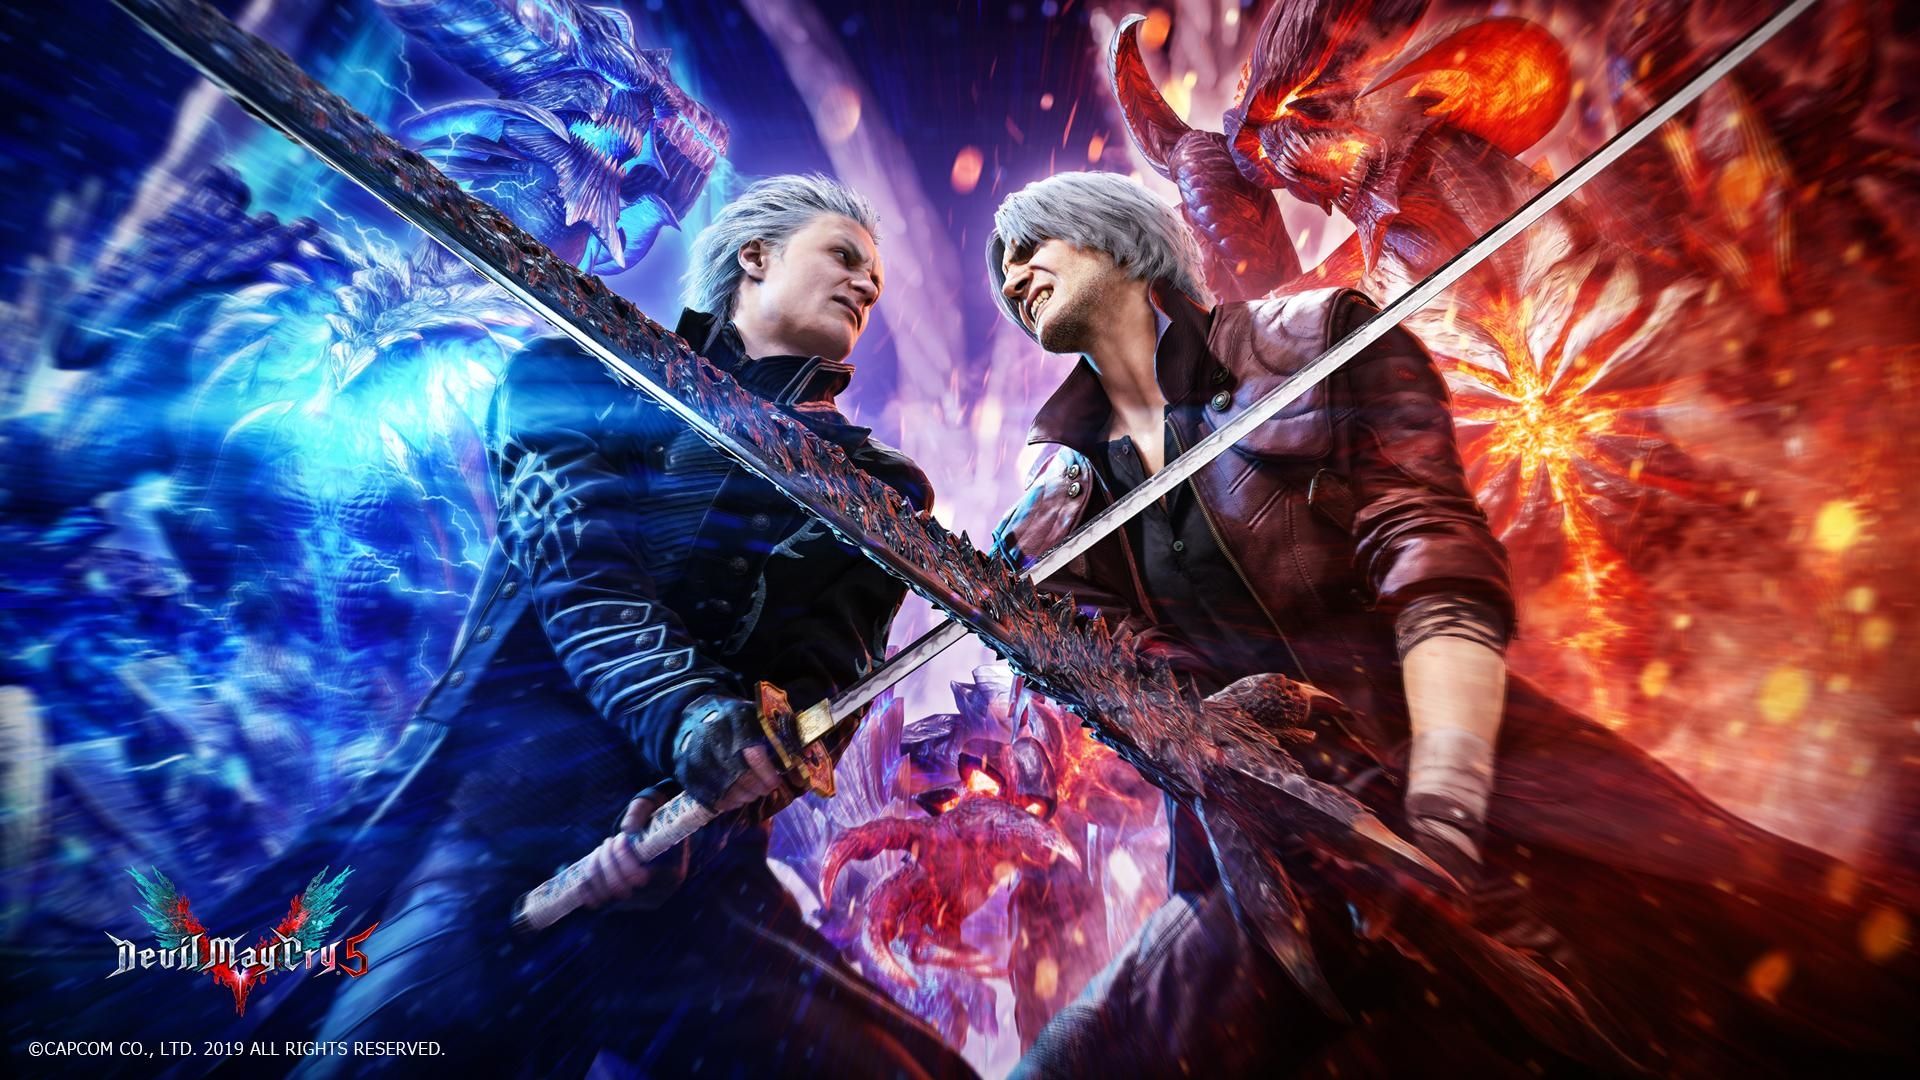 Dante vs Vergil Devil May Cry HD Laptop Wallpaper, HD Games 4K Wallpaper, Image, Photo and Background